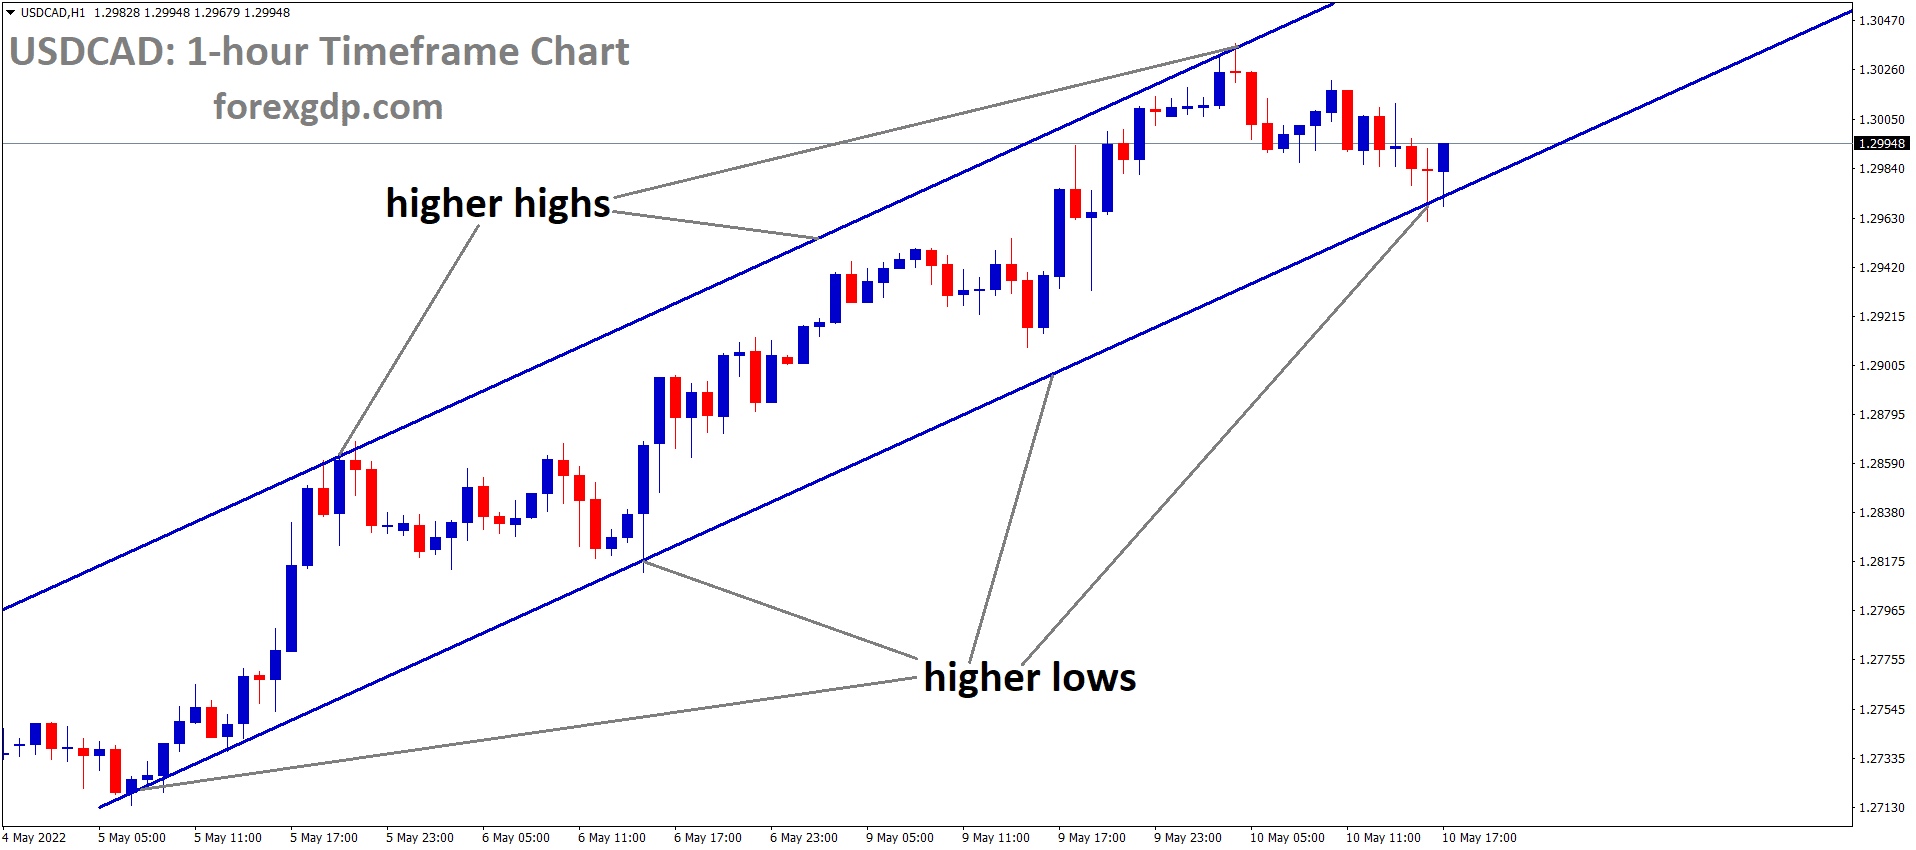 USDCAD H1 Time Frame Analysis Market is moving in an Ascending channel and the Market has rebounded from the higher low area of the Channel